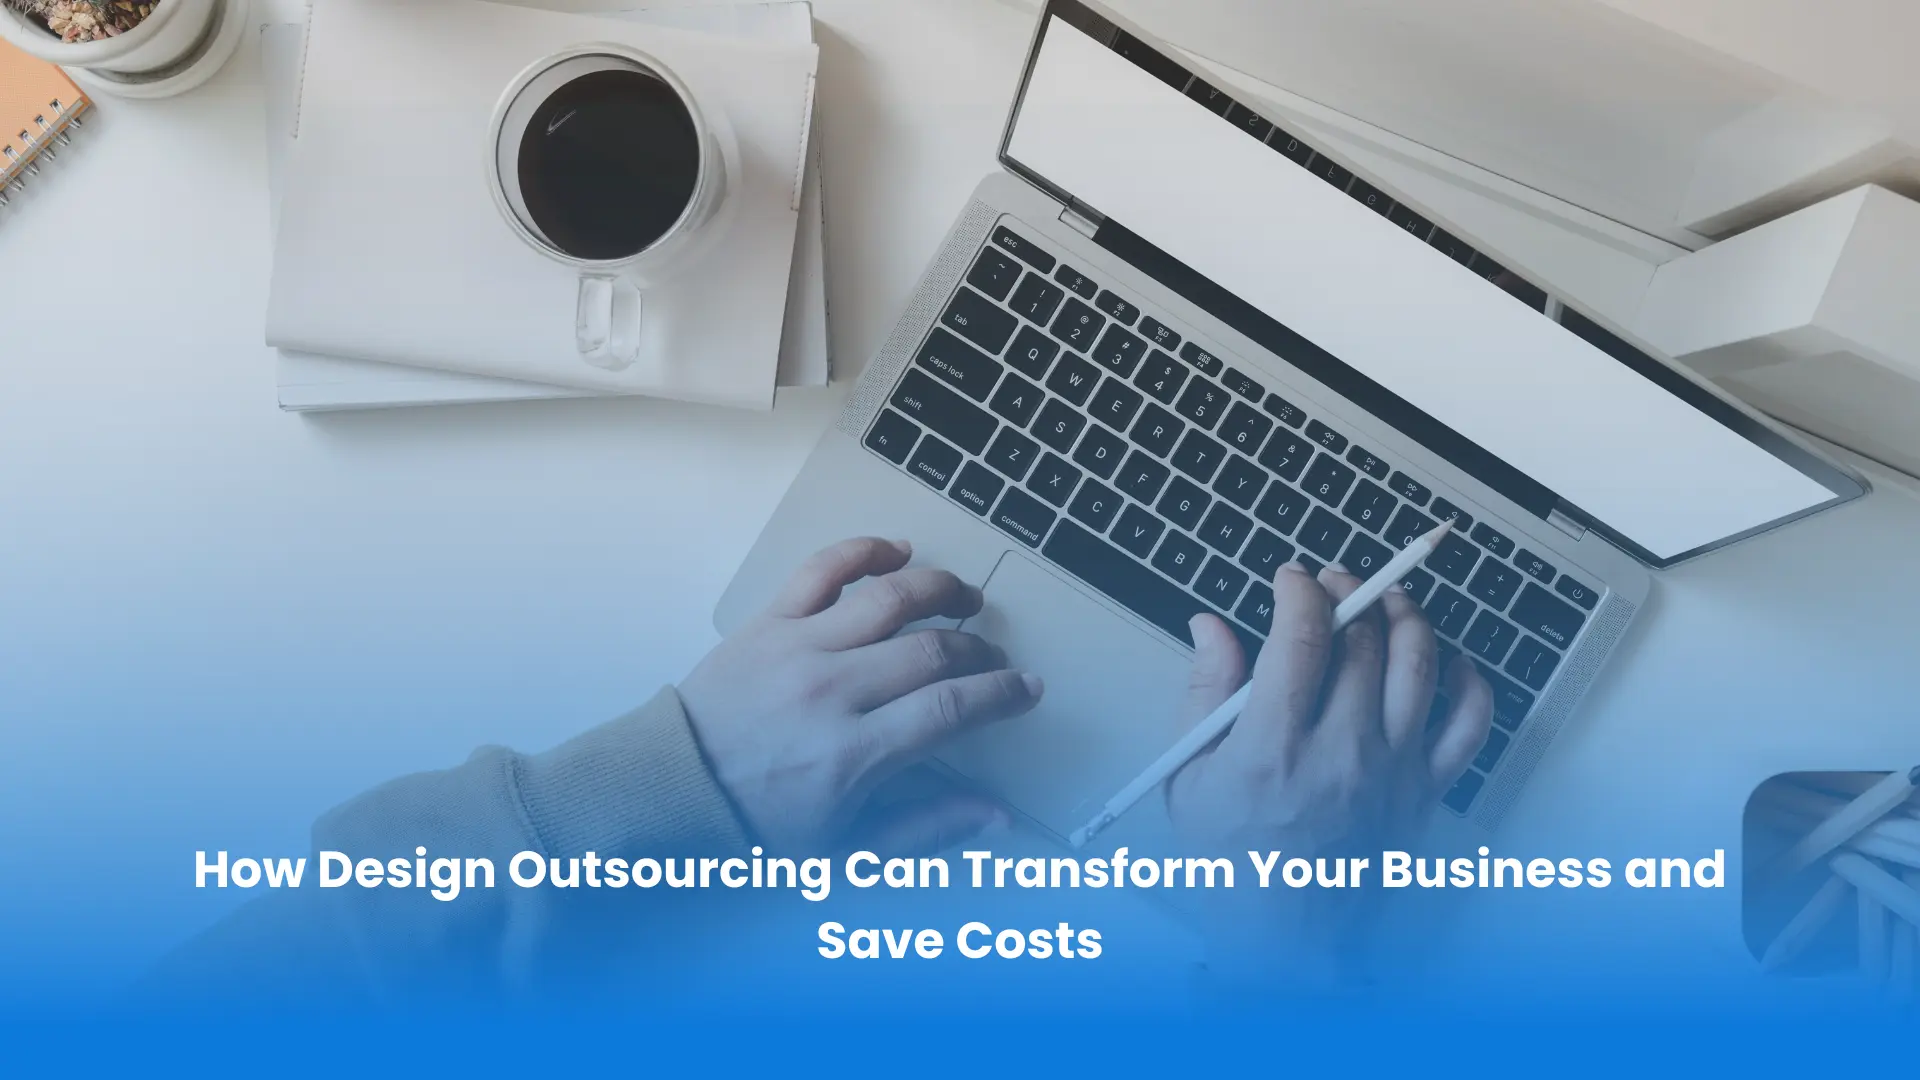 The benefits of outsourcing design